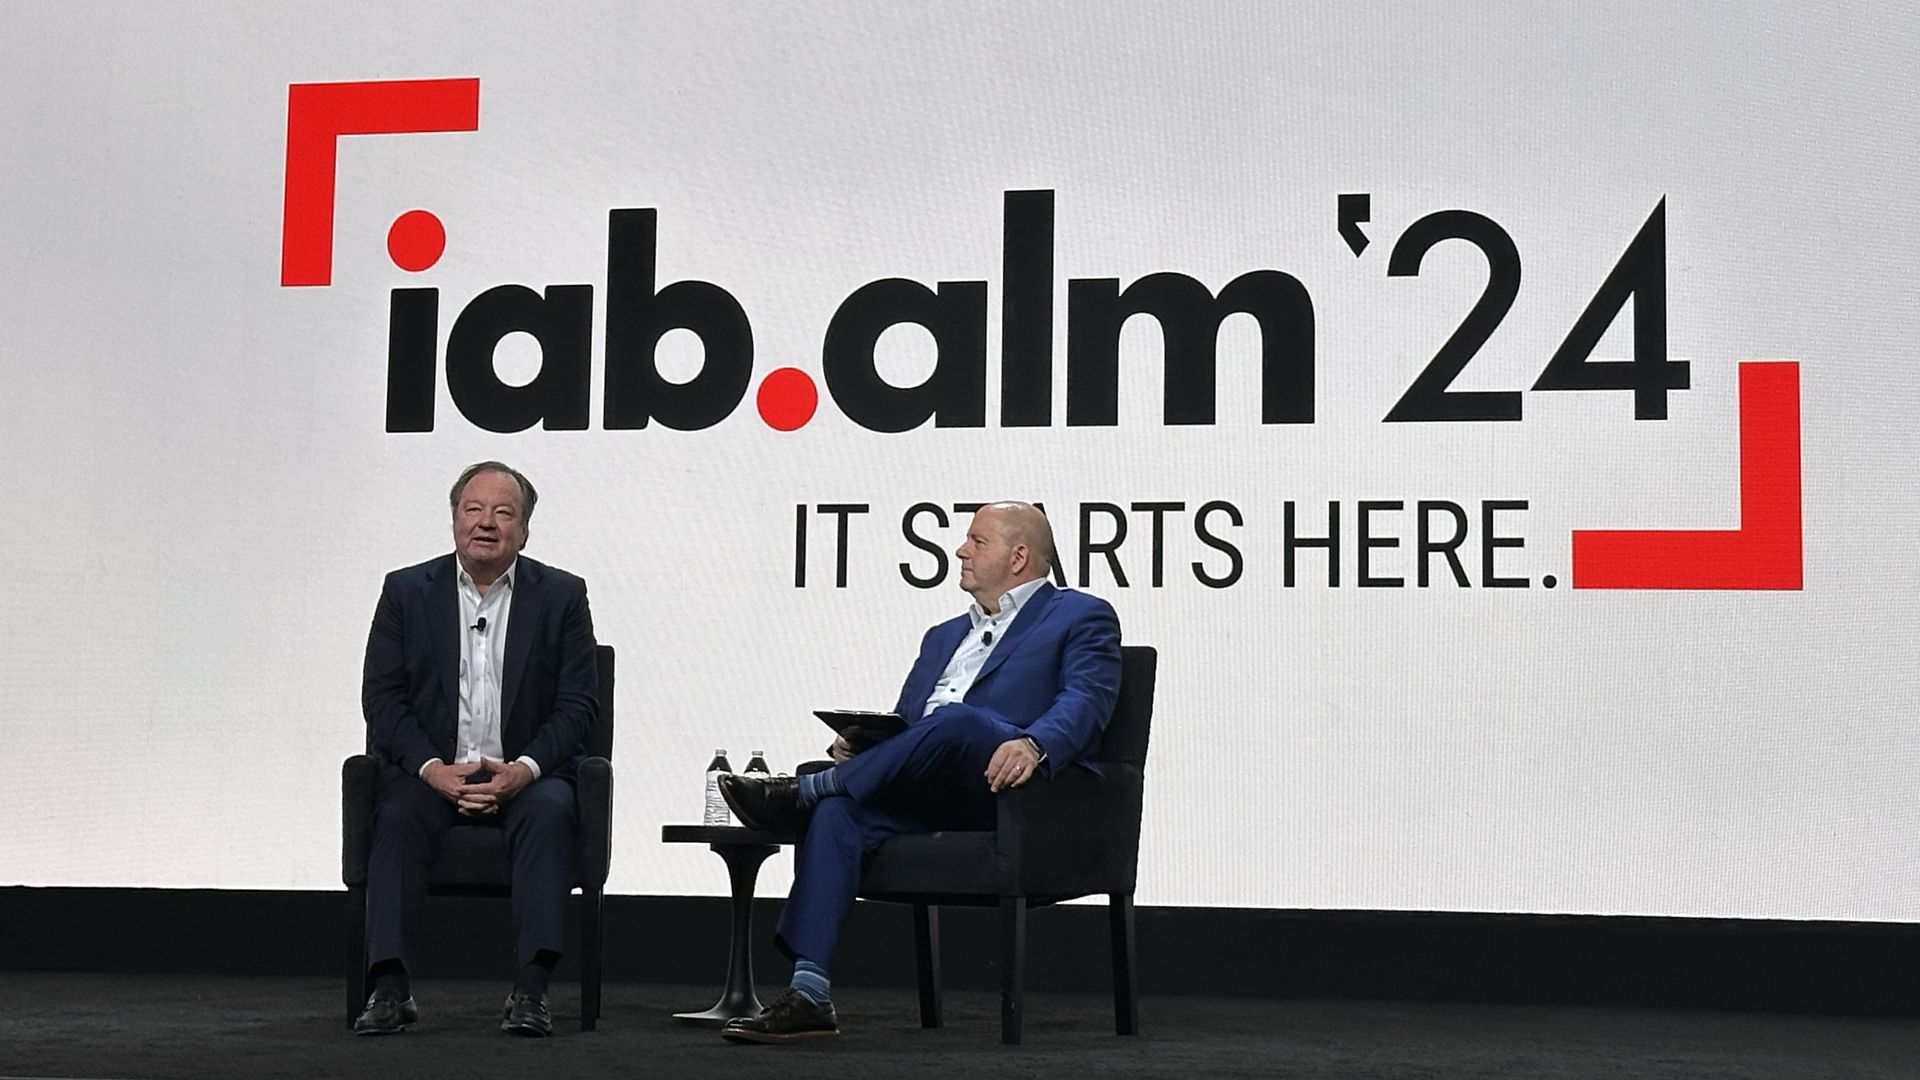 Paramount Global CEO Bob Bakish and IAB CEO David Cohen sitting on chairs on a stage with IAB AM '24 It Starts Here in the background